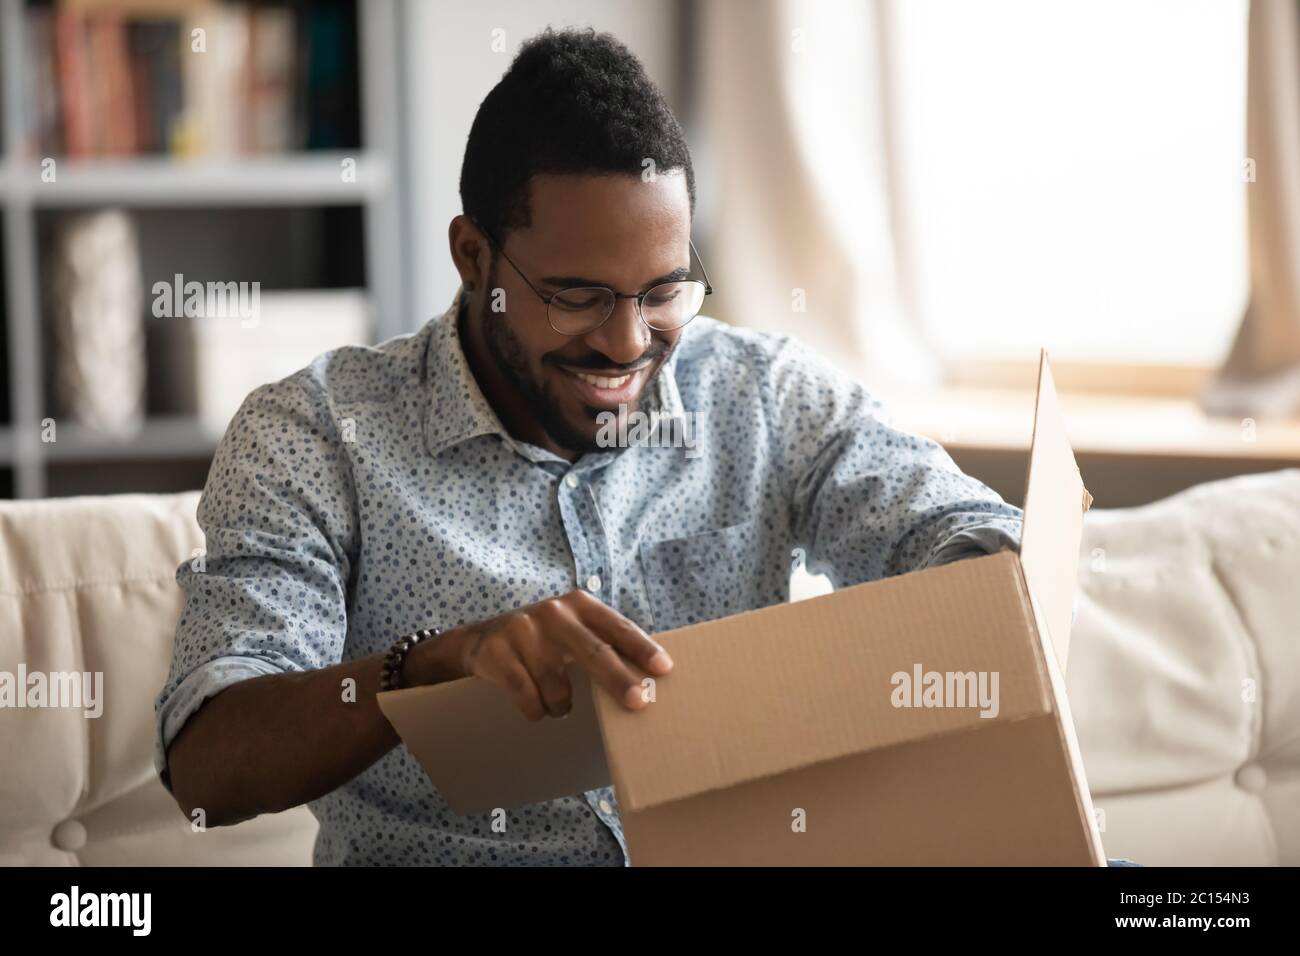 African man opening parcel seated on couch at home Stock Photo